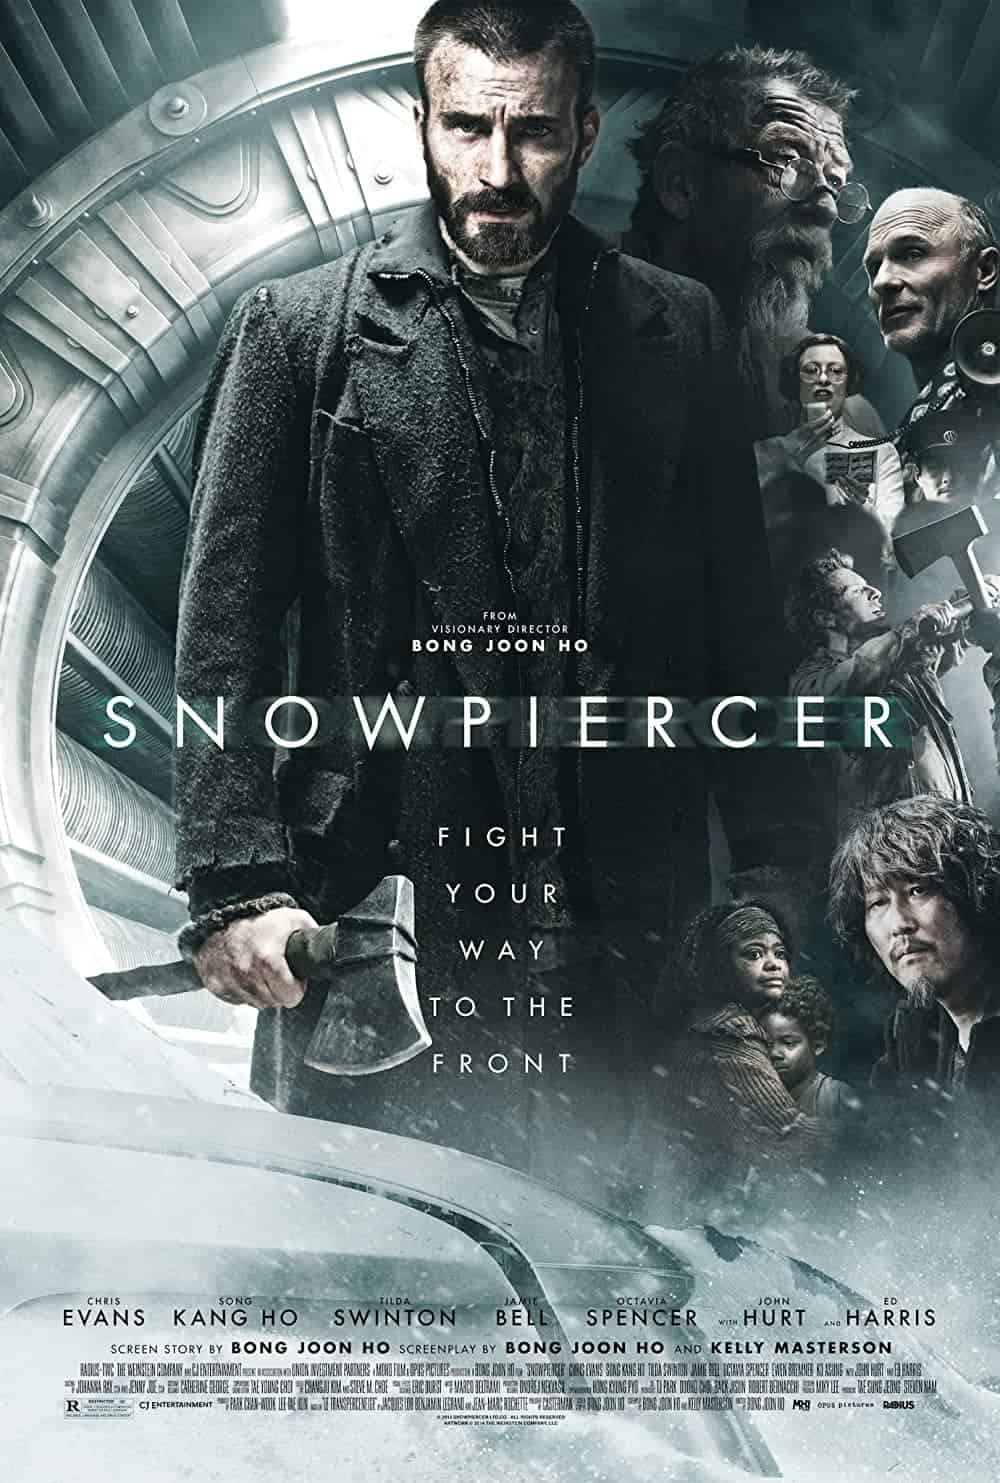 Snowpiercer (2013) Best Train Movies You Can't Miss